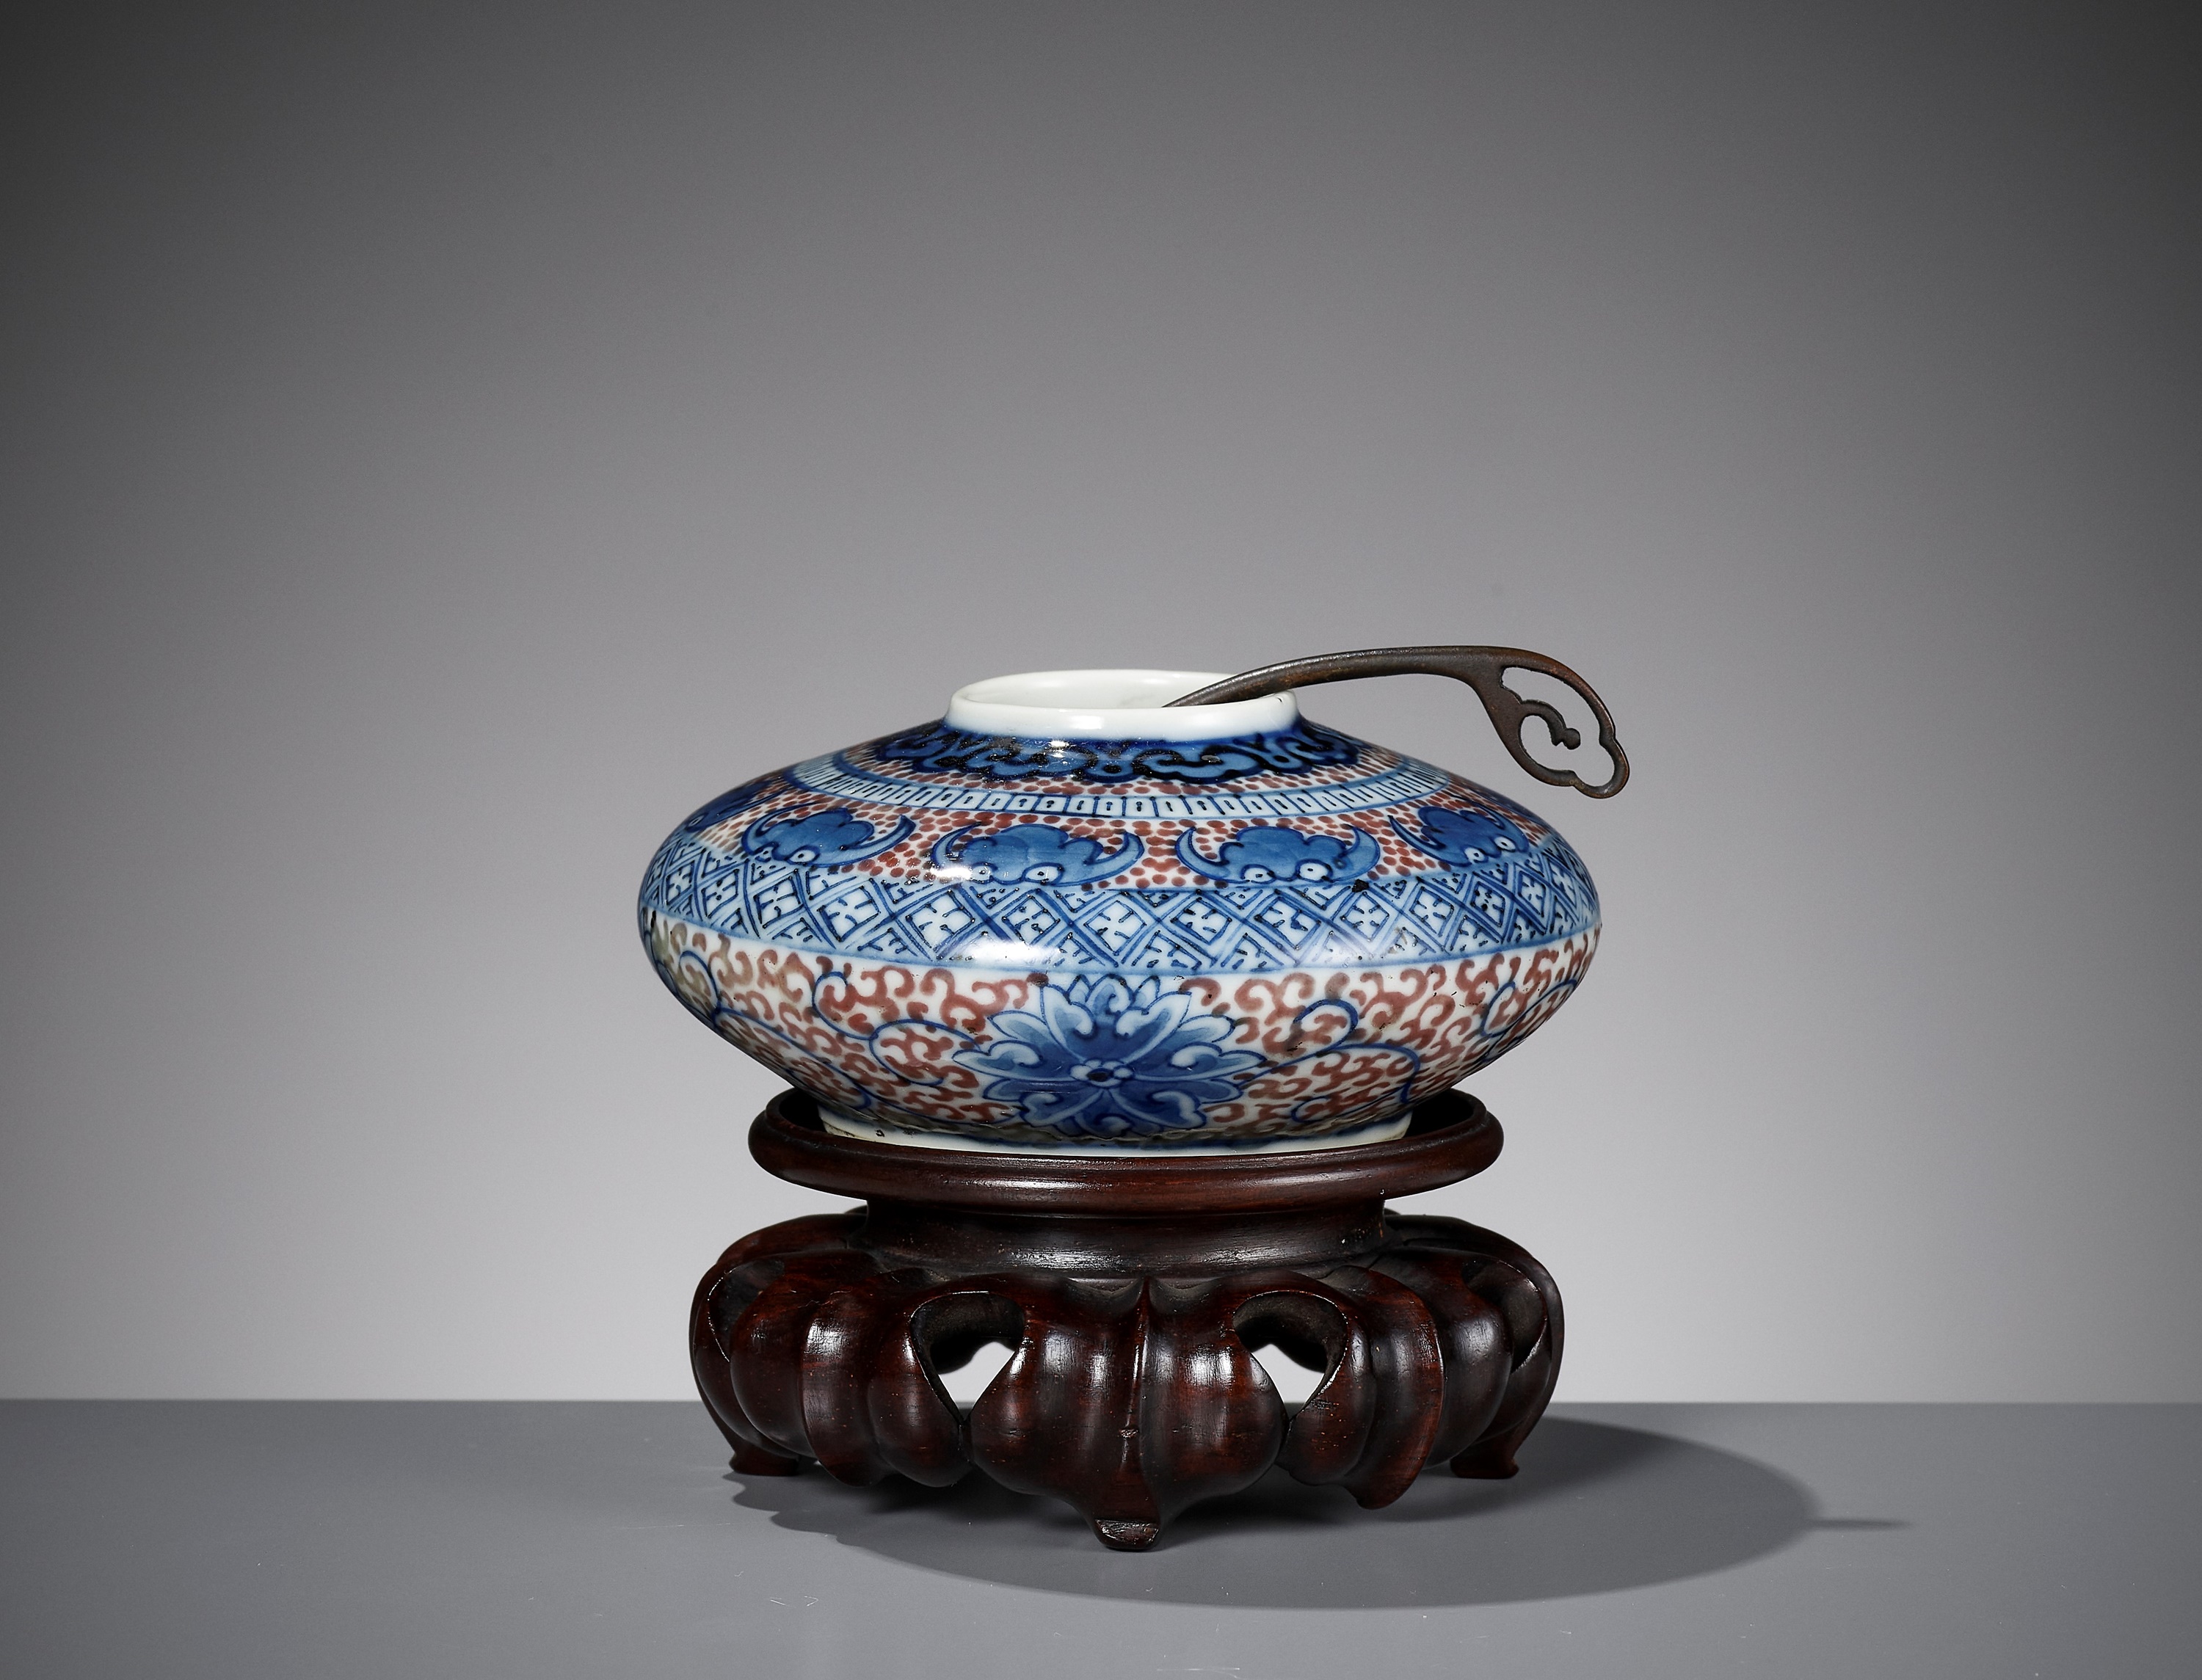 A PORCELAIN WATER POT, WITH MATCHING BRONZE SPOON AND WOOD STAND, QING DYNASTY